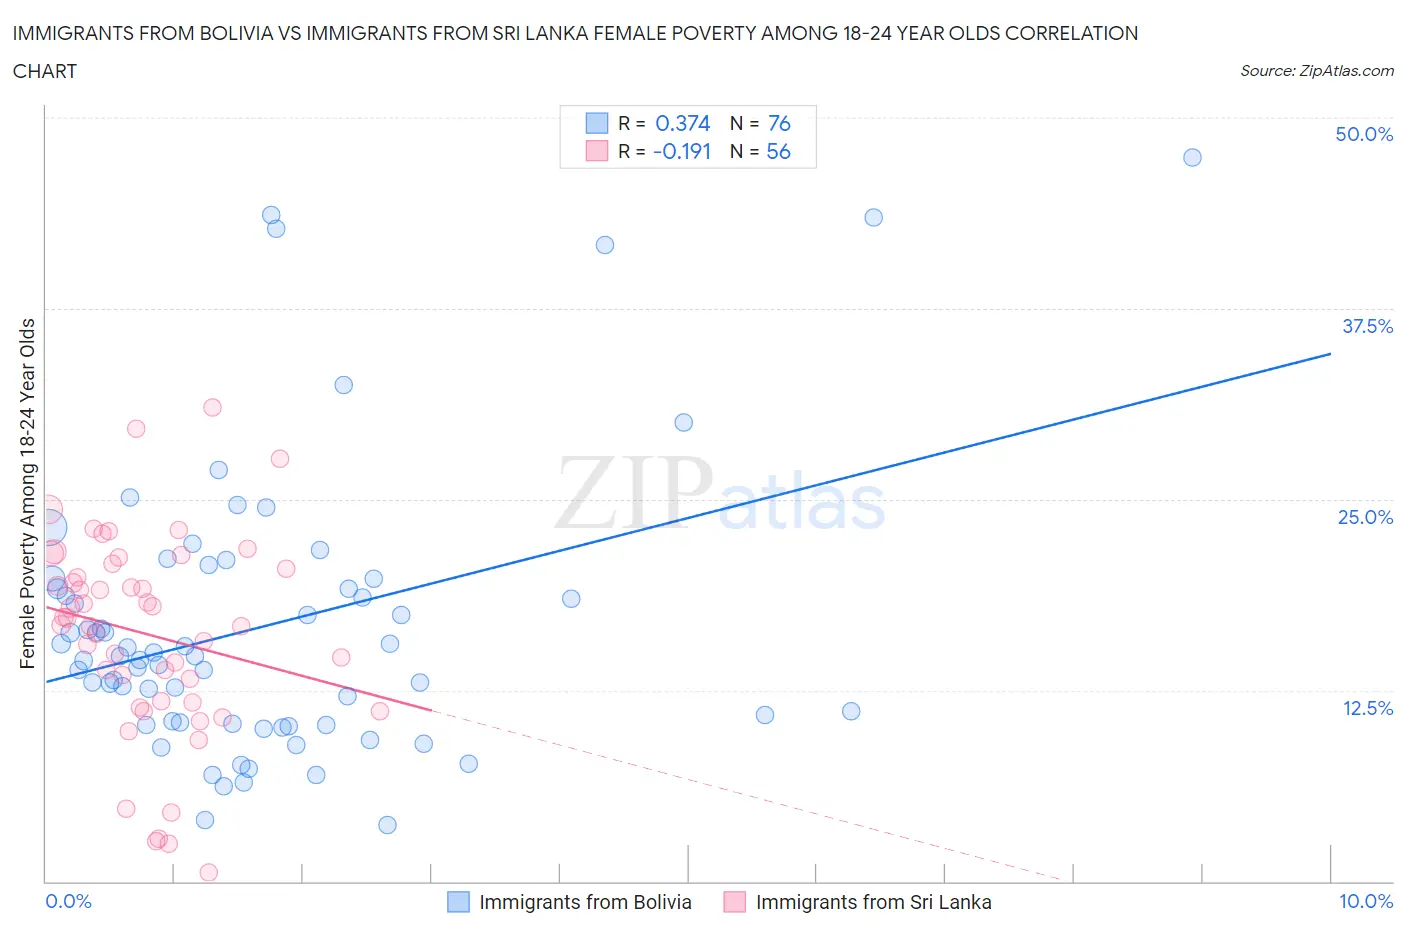 Immigrants from Bolivia vs Immigrants from Sri Lanka Female Poverty Among 18-24 Year Olds